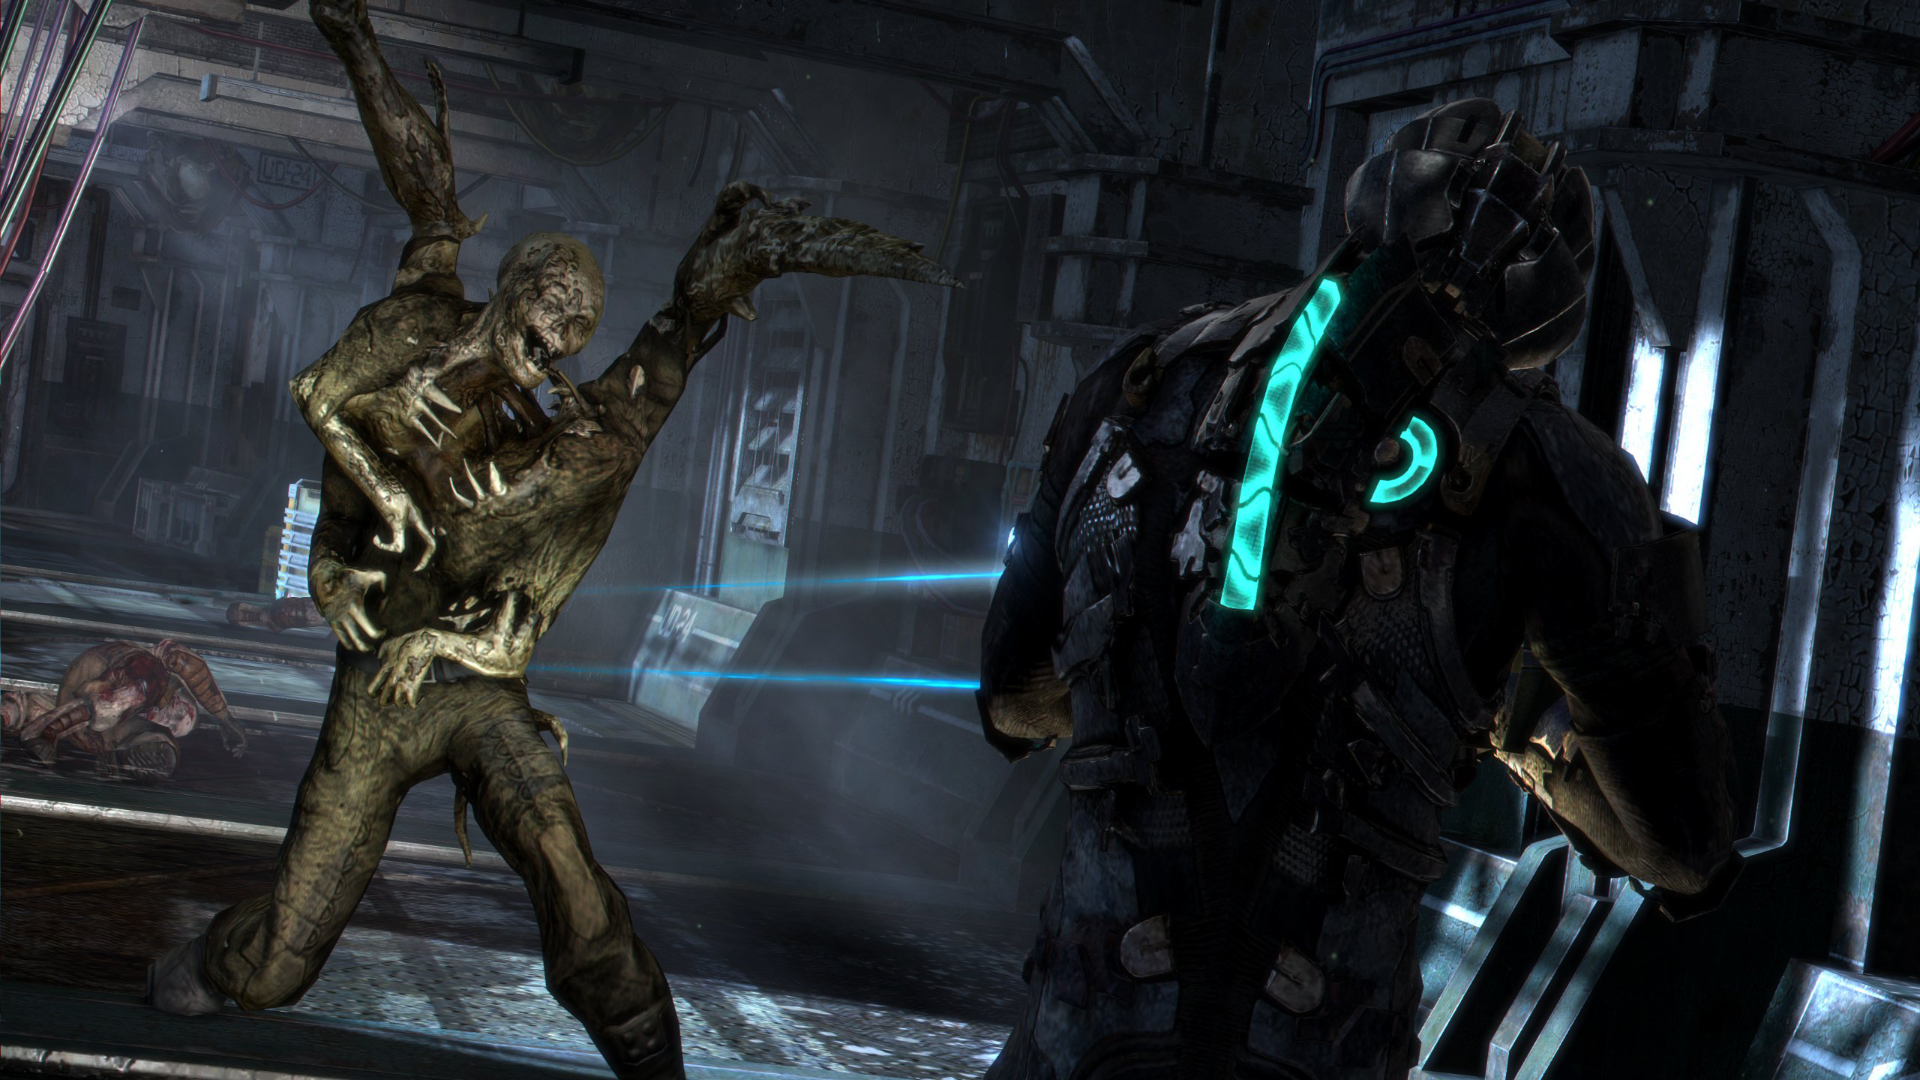 Dead Space 2 remake appears in EA poll for future games + Dead Space 3